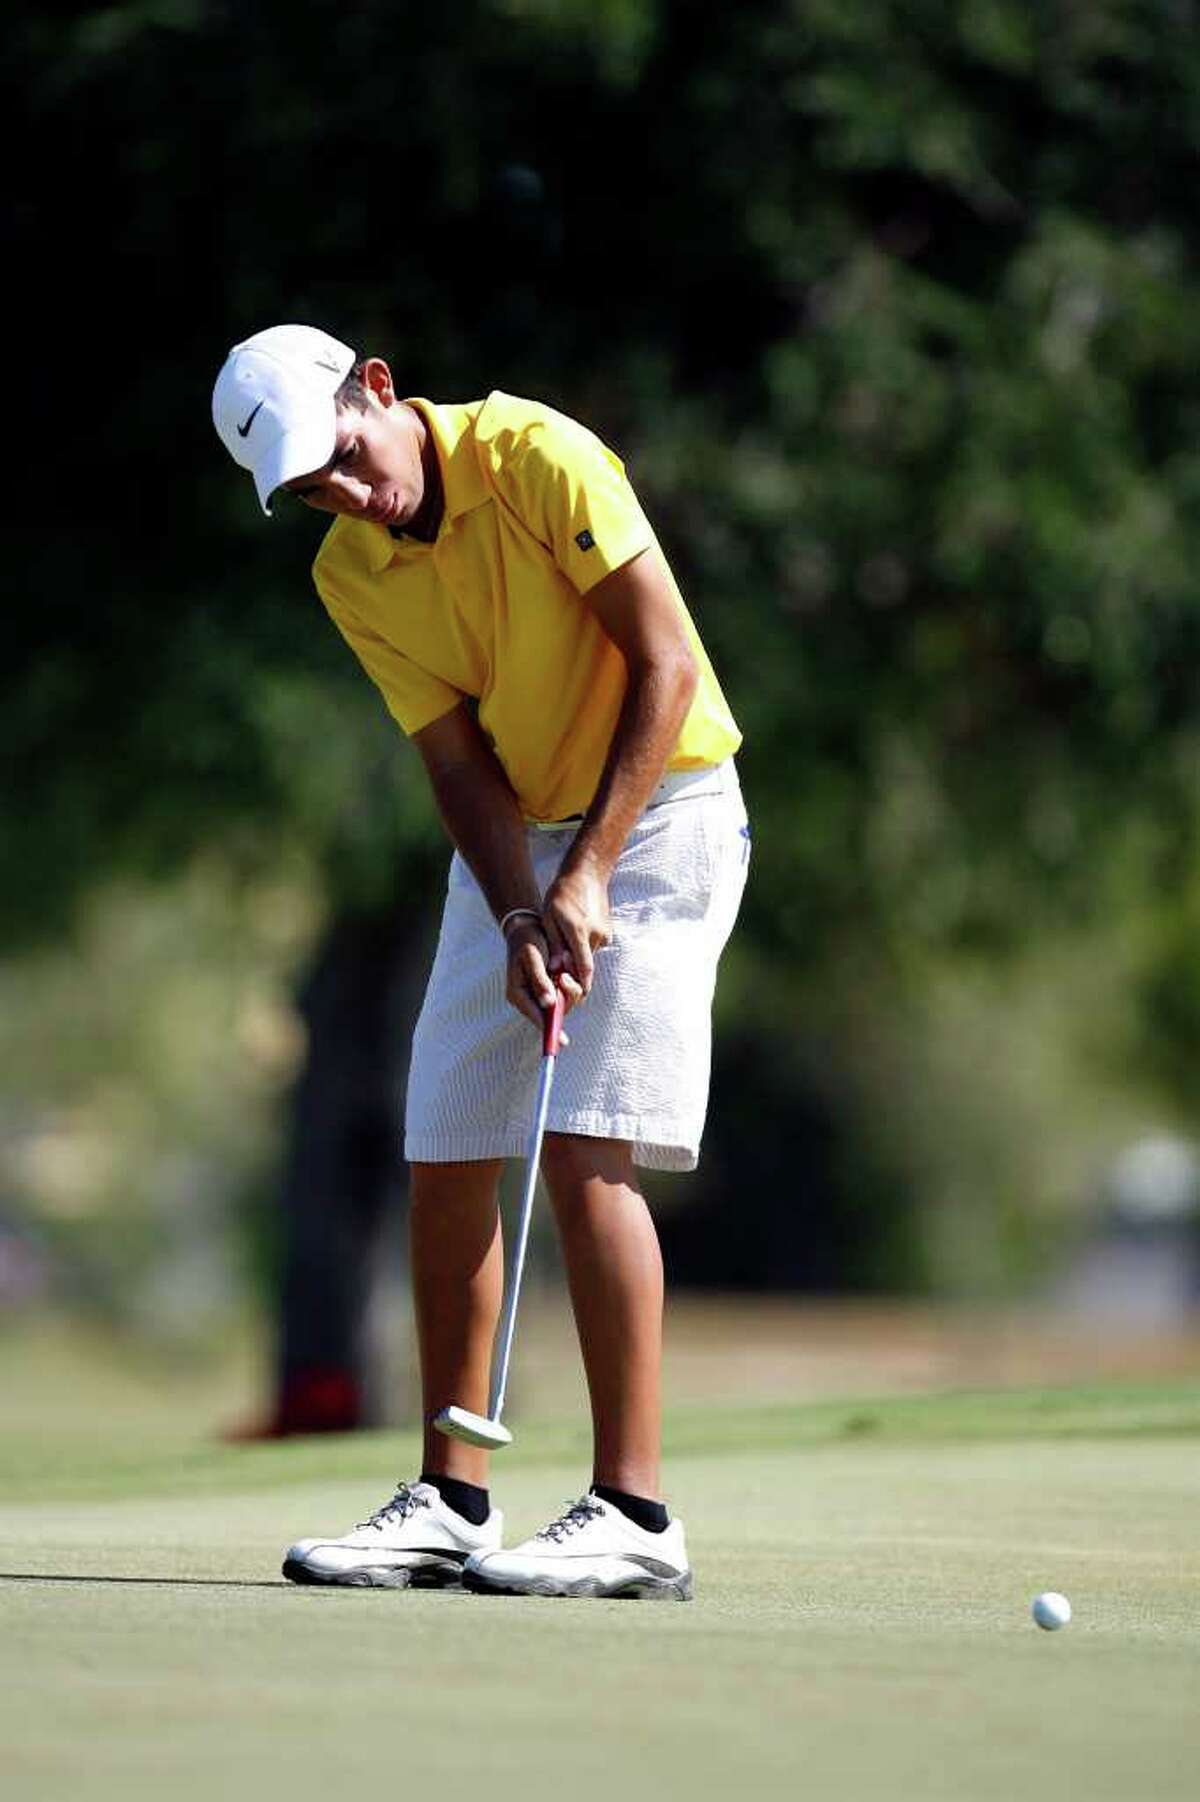 Alex Bissaro putts during the Greater San Antonio Junior Championship at Brackenridge Golf Course on Thursday, July 28, 2011. Bissaro gained the title after losing on the final hole last year.